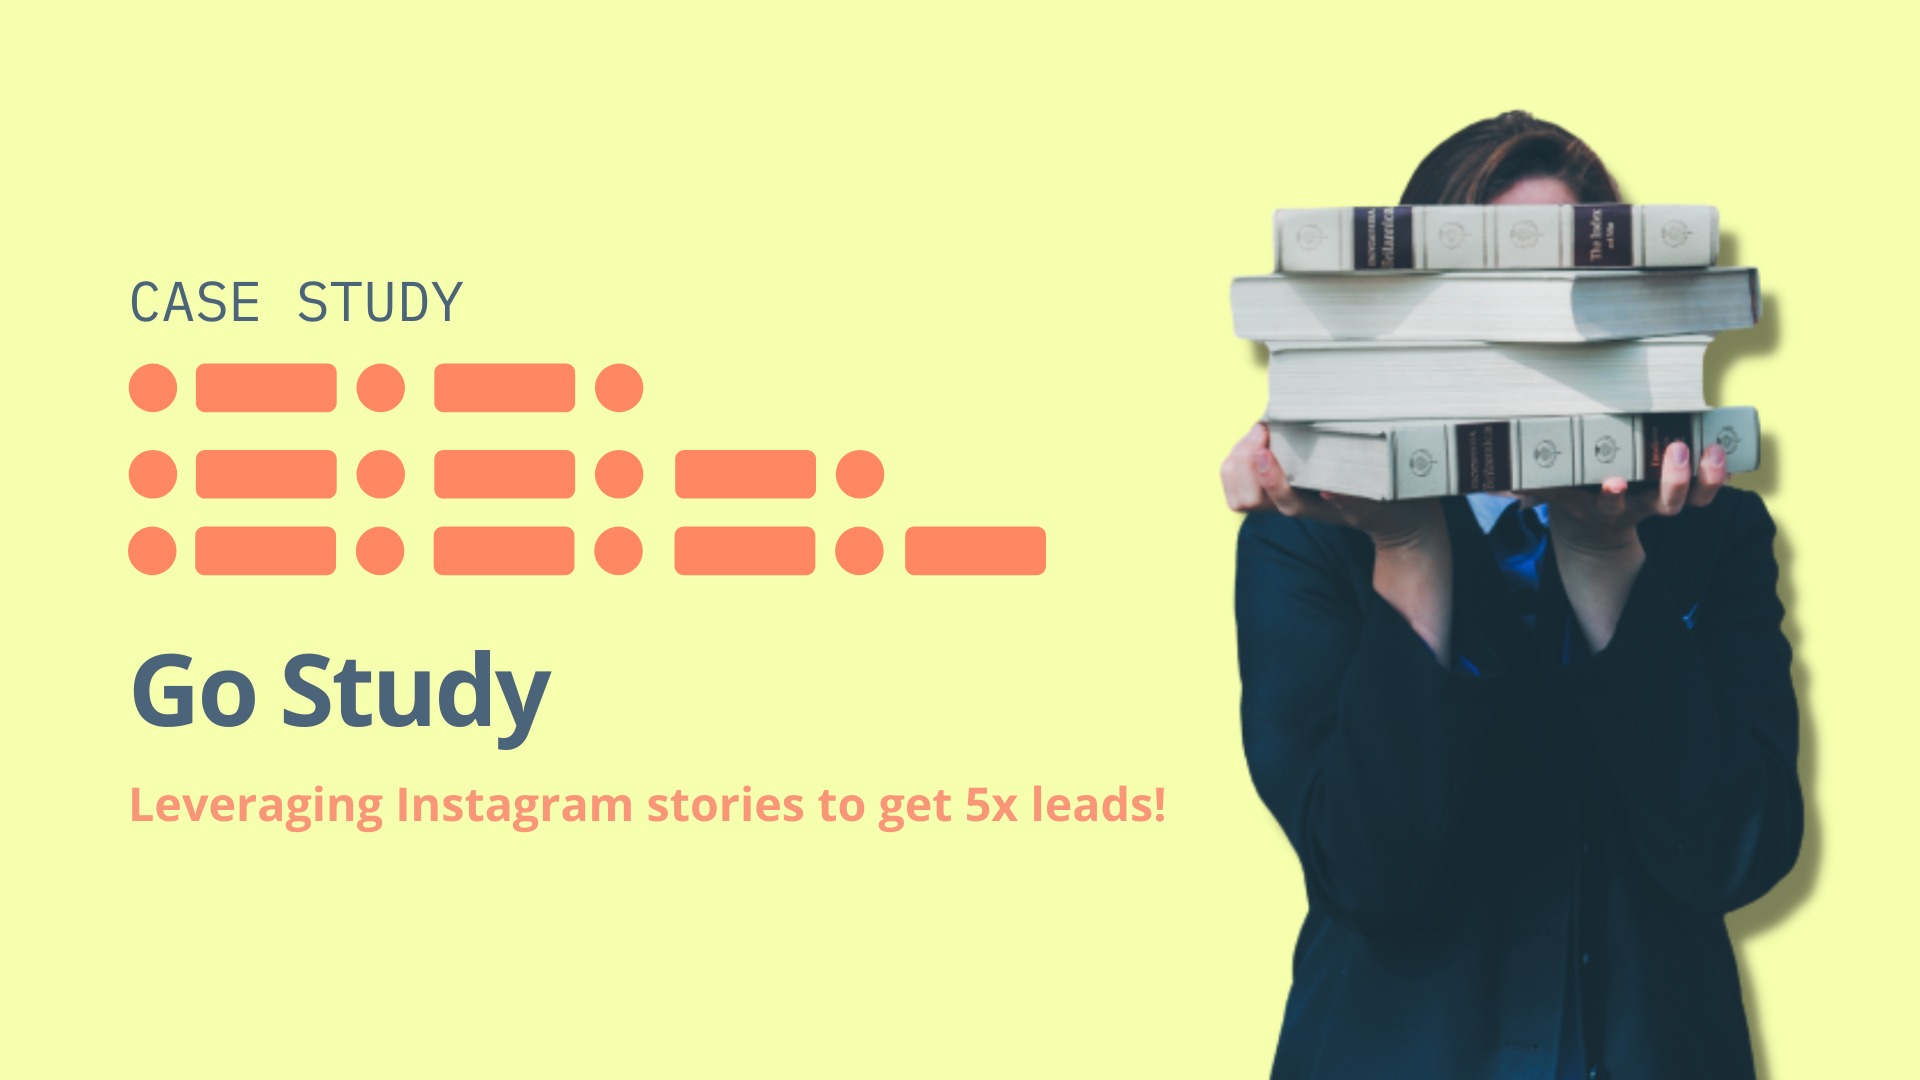  Go Study Campaign Case Study: Leveraging Instagram stories to get 5x leads!  image